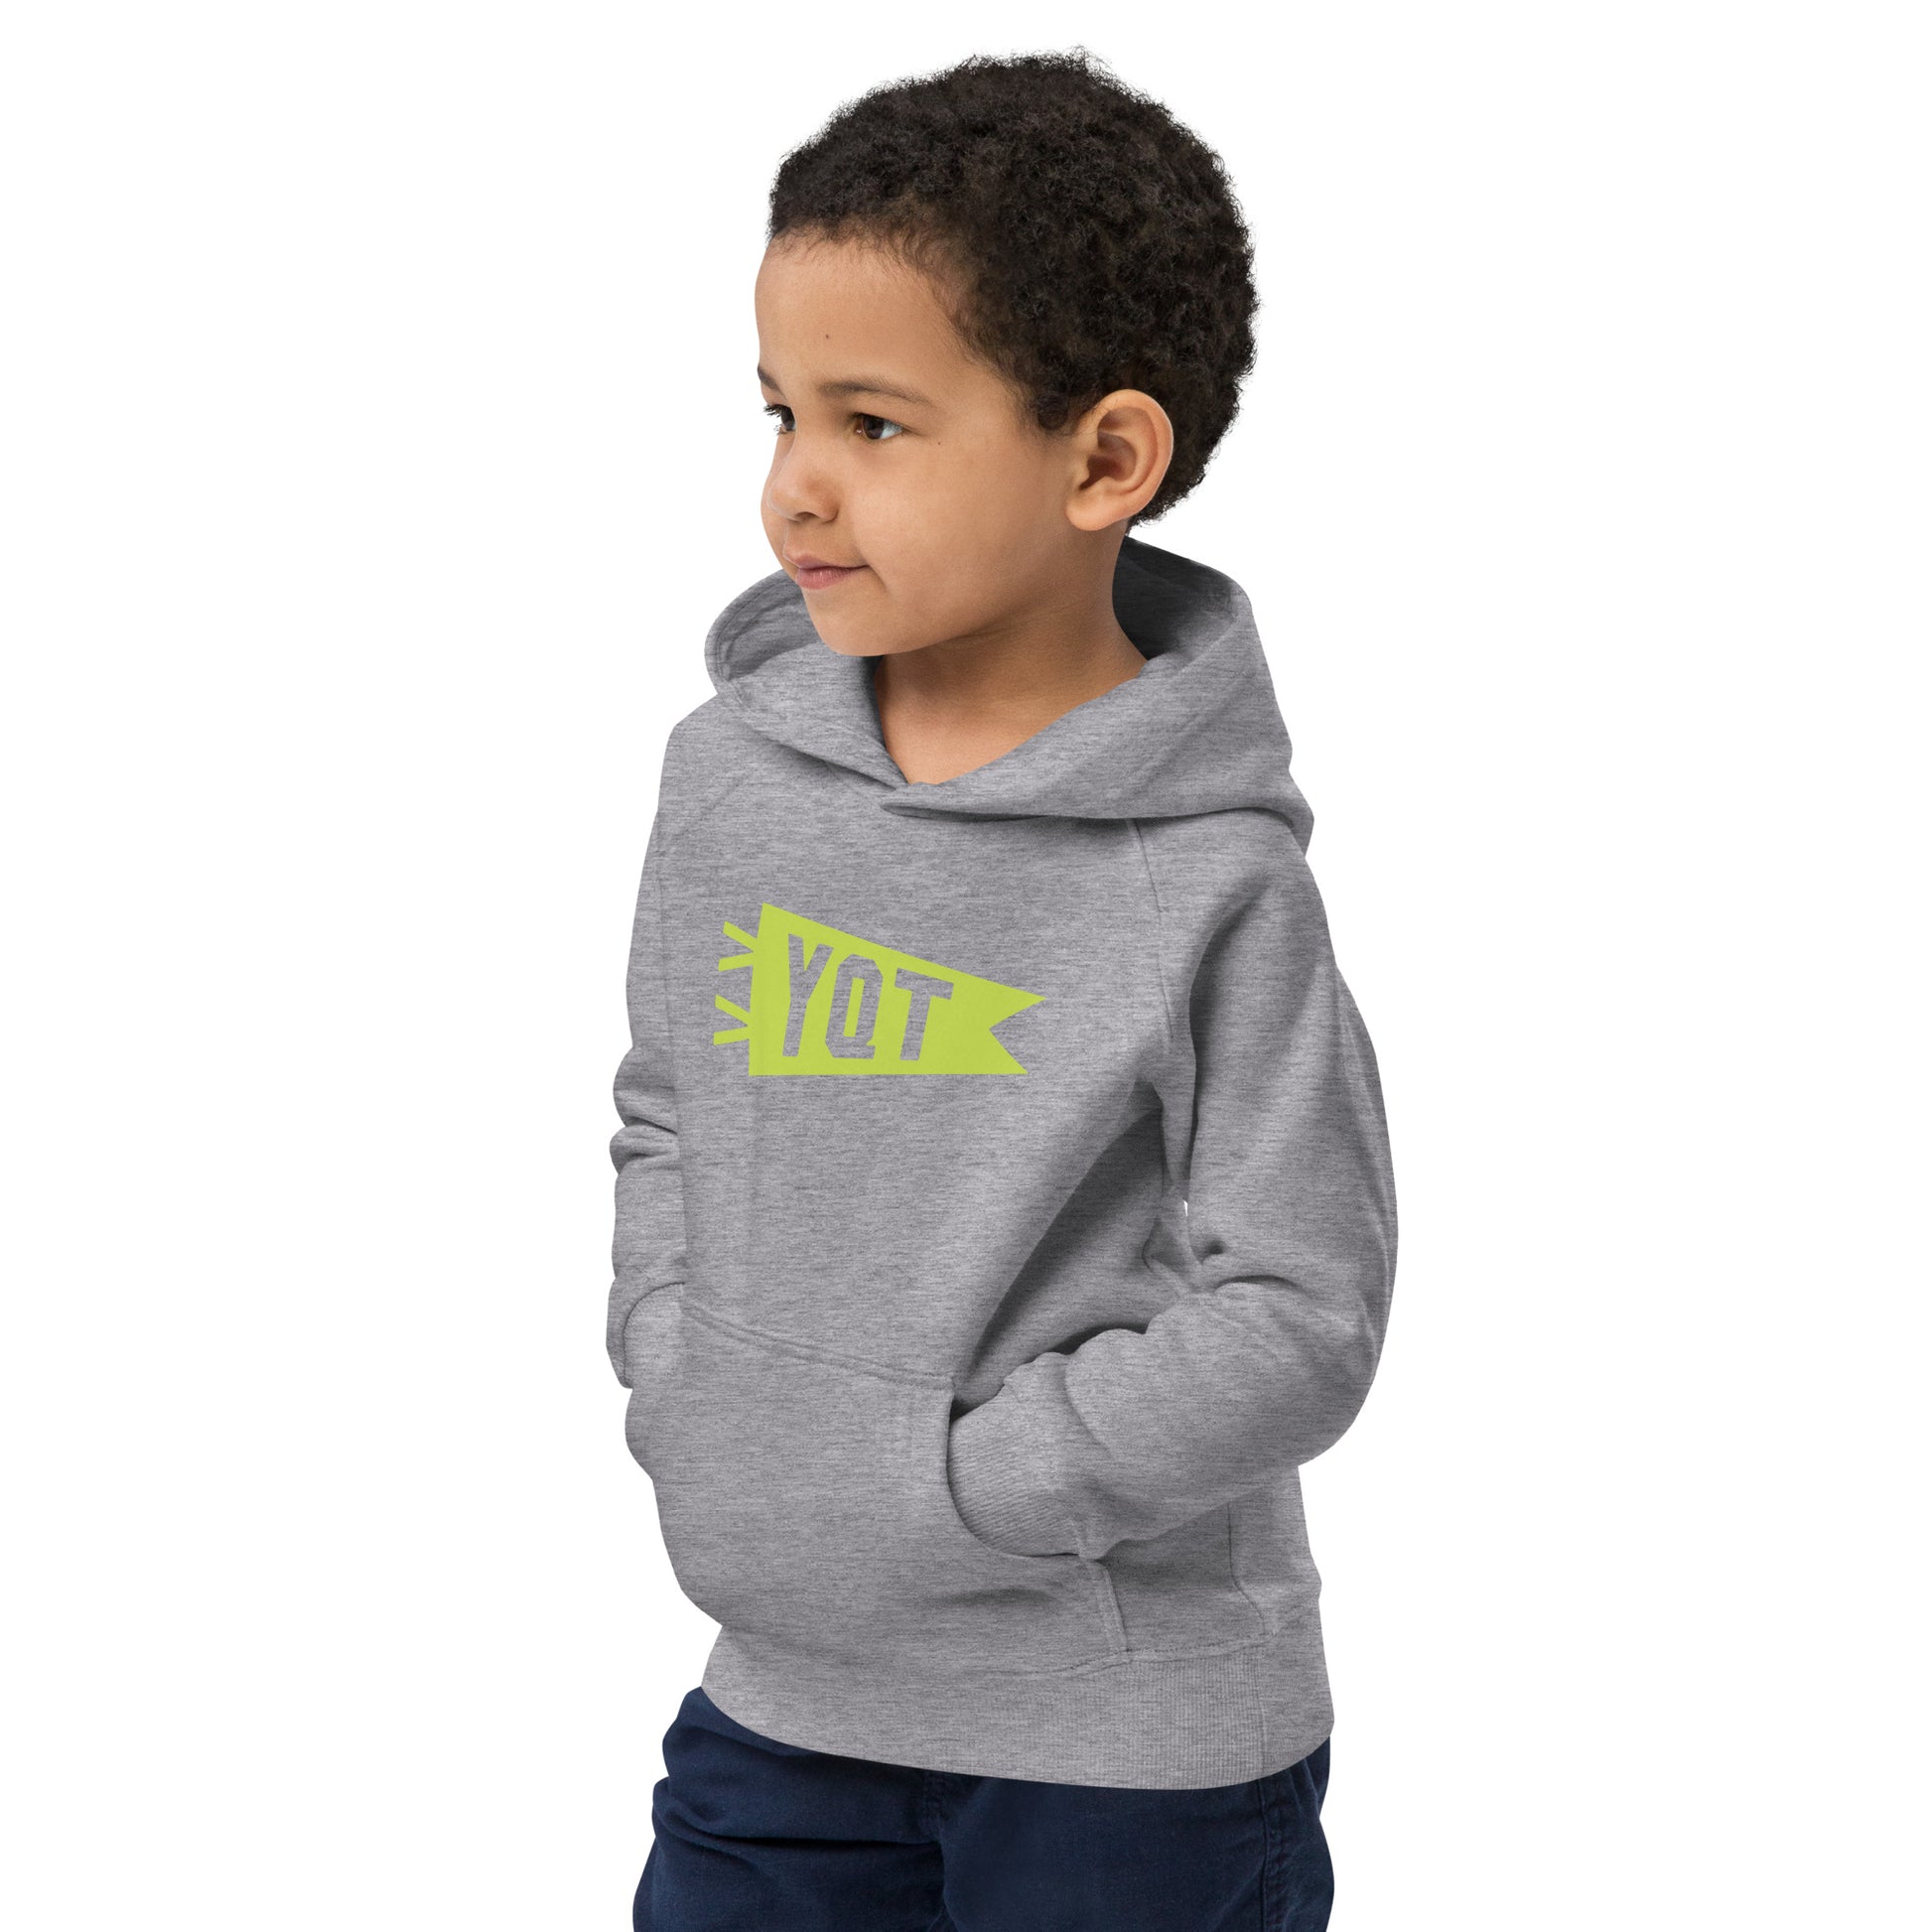 Kid's Sustainable Hoodie - Green Graphic • YQT Thunder Bay • YHM Designs - Image 12